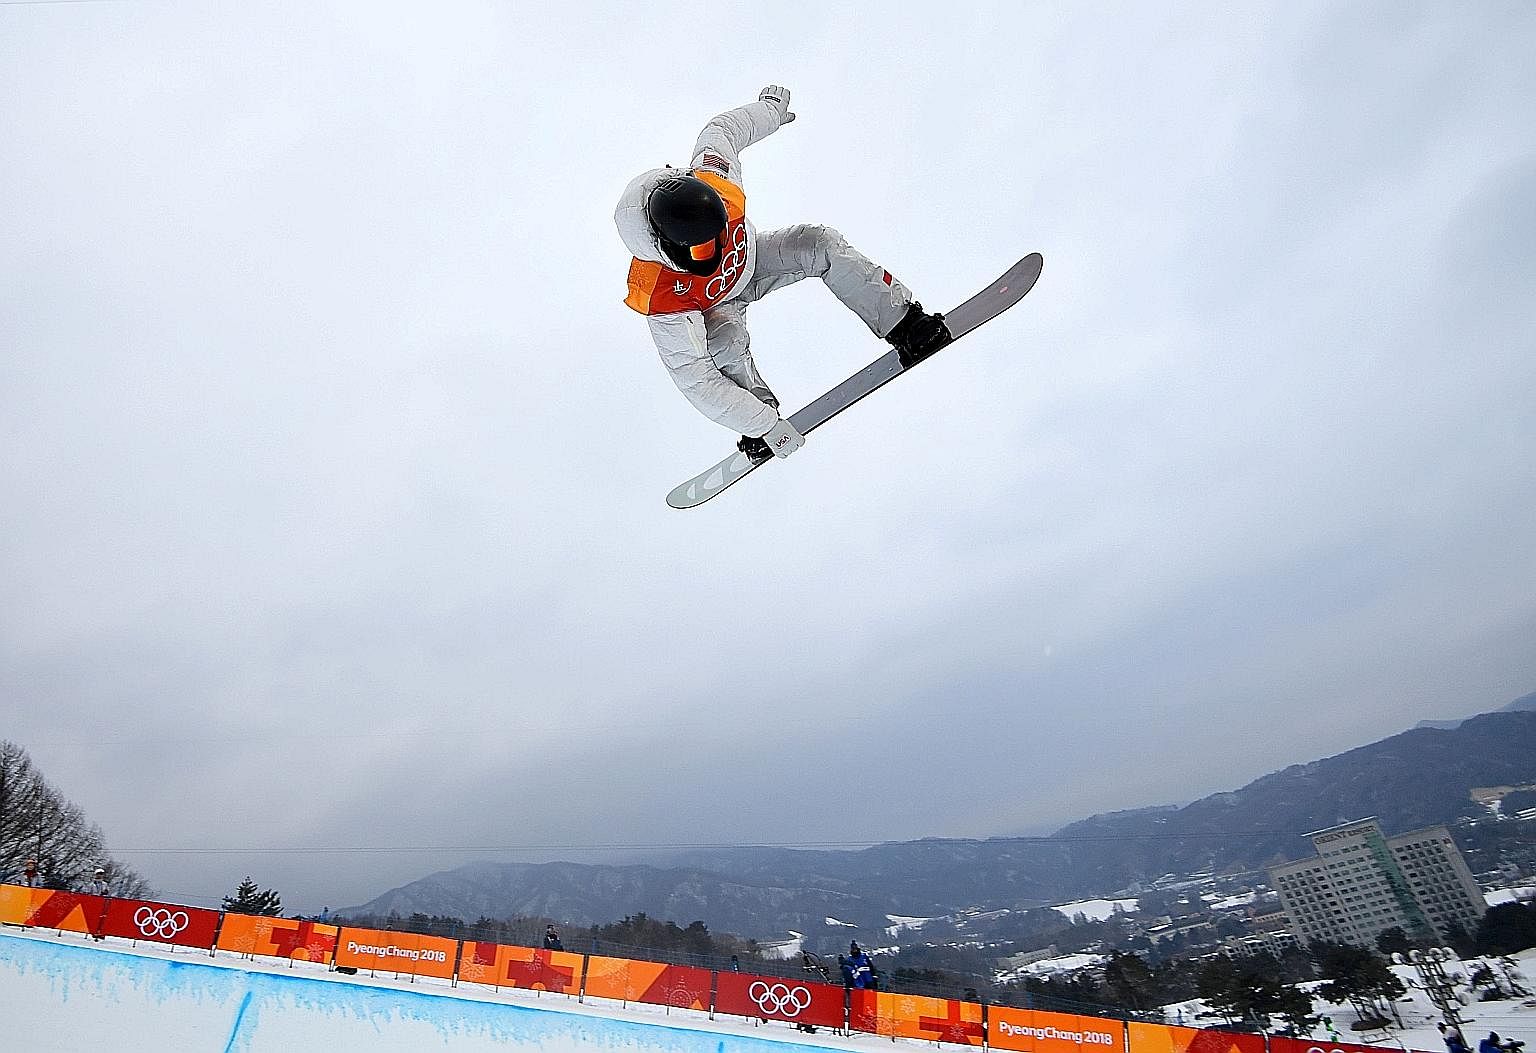 American Shaun White executing a move in the half-pipe final at Phoenix Snow Park on his way to a third Winter Olympics gold medal.